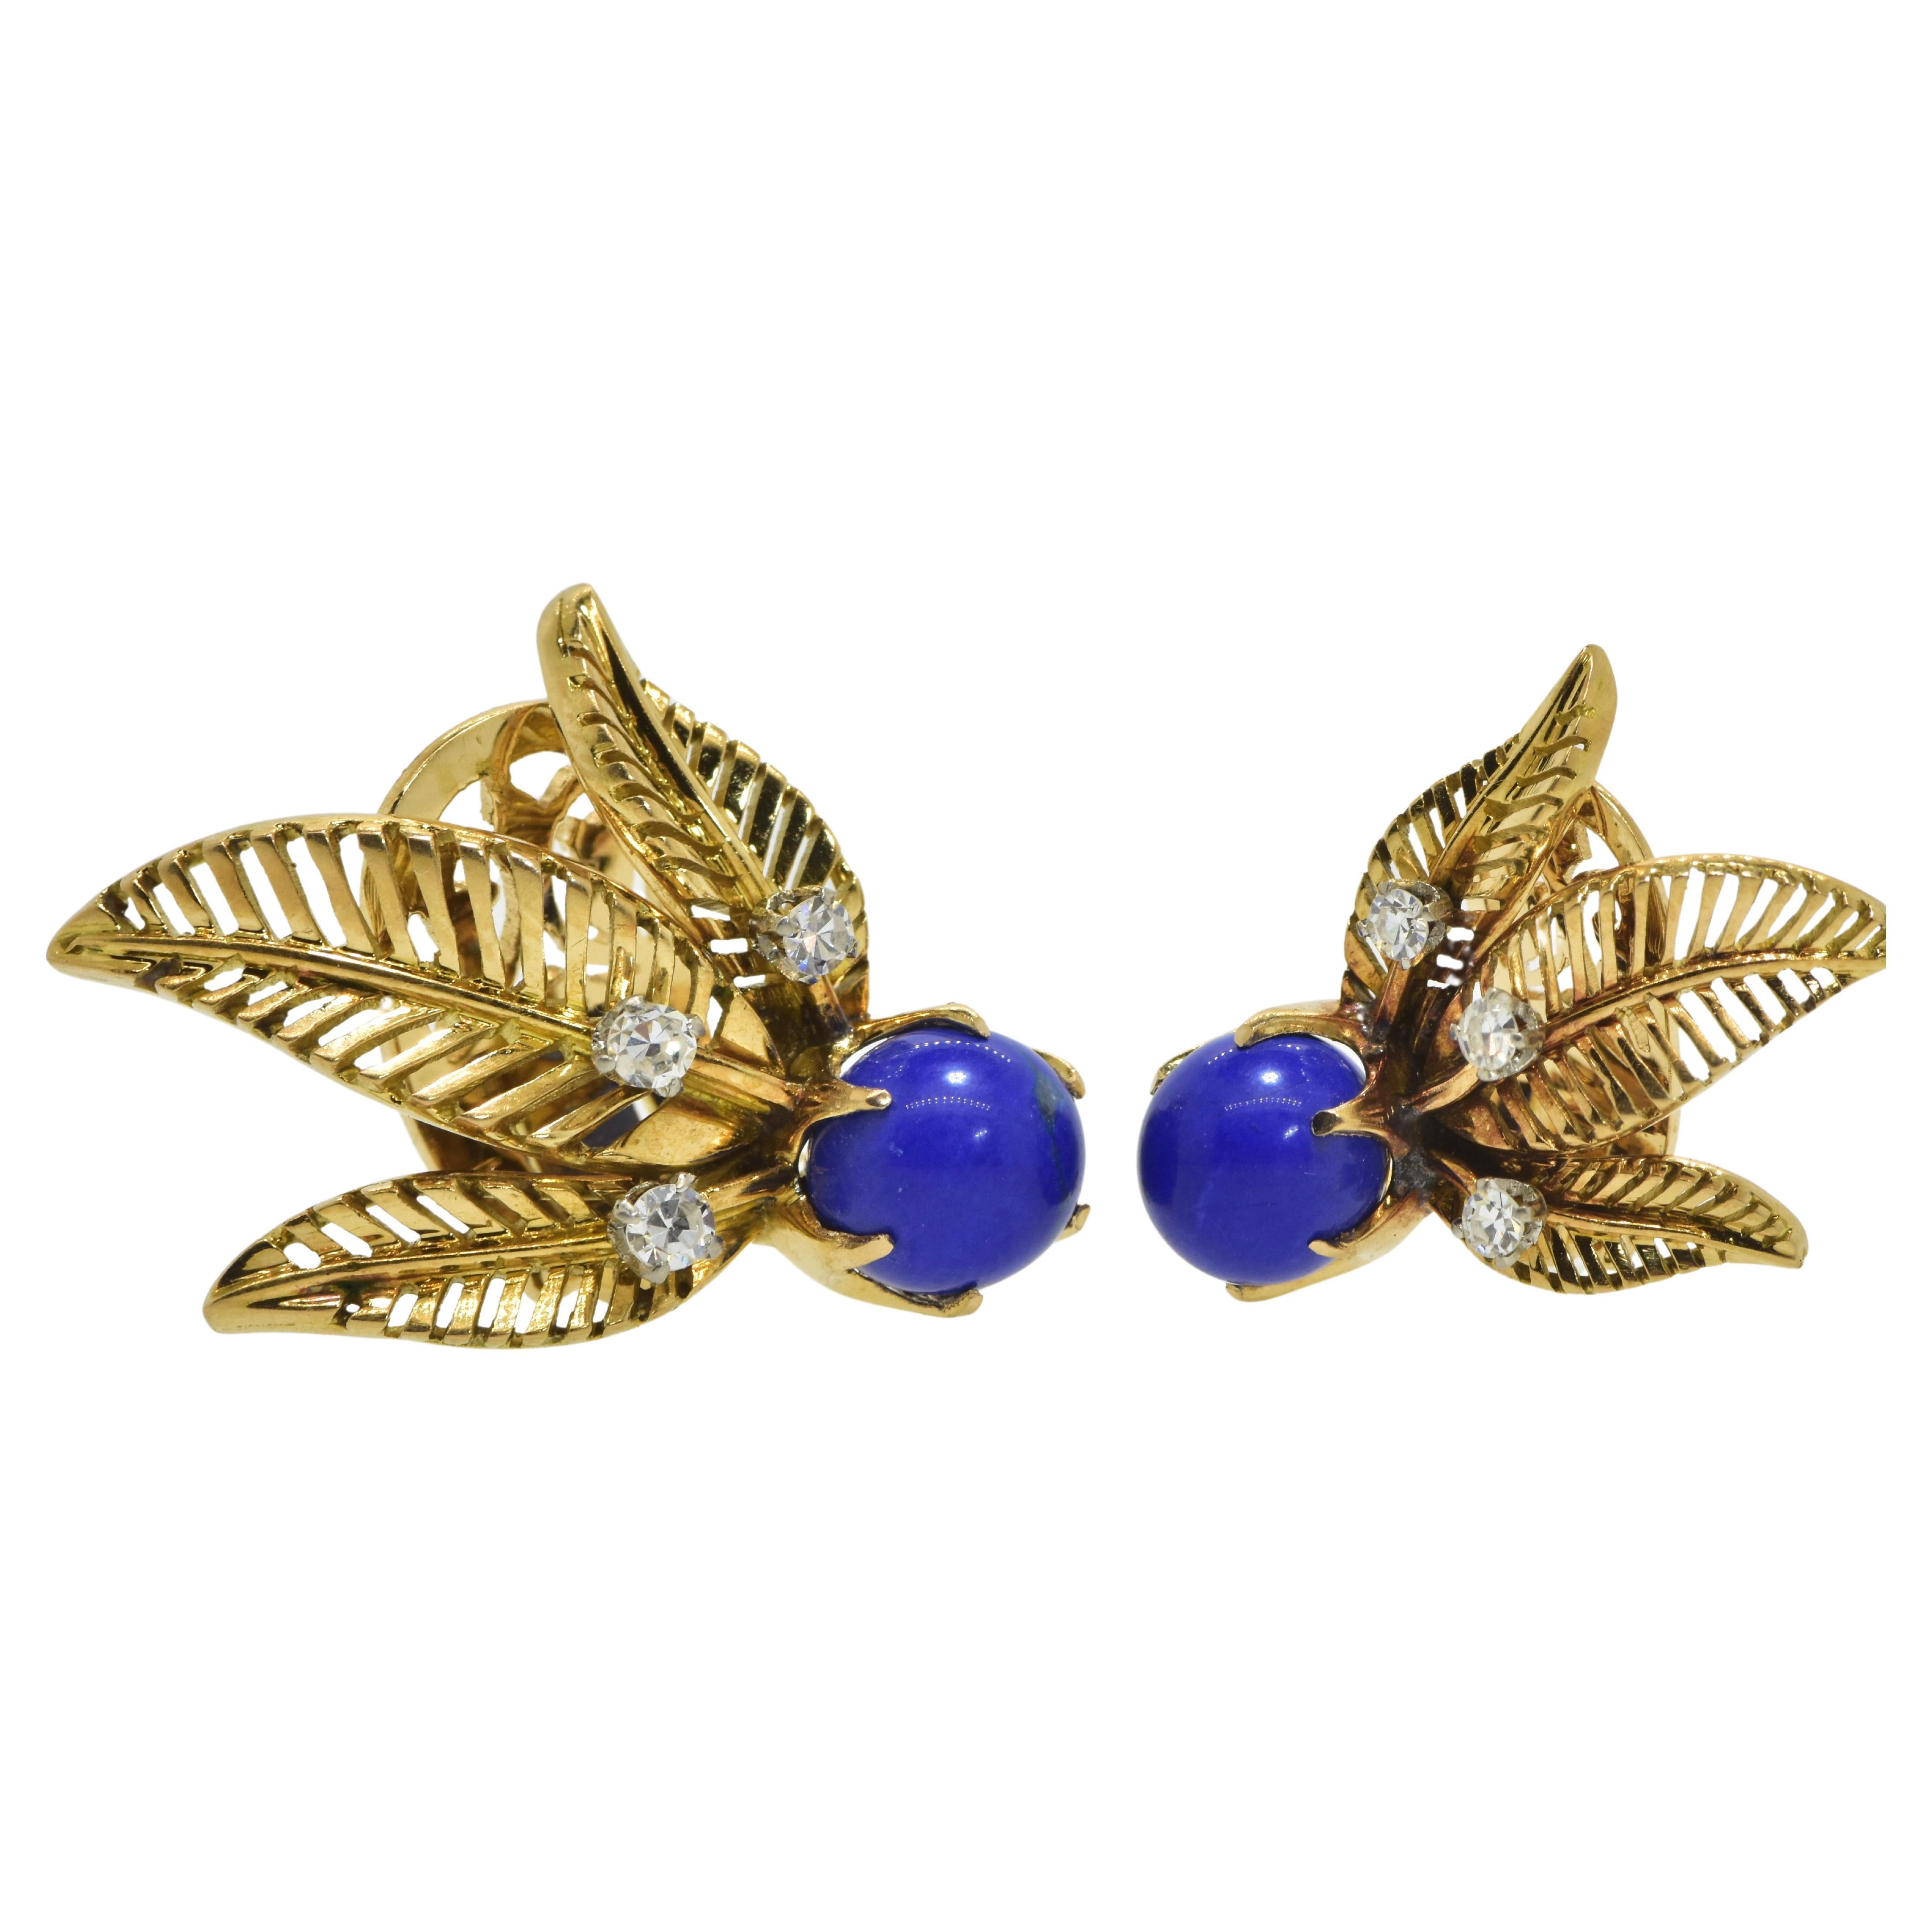  18K Yellow Gold, Fine Lapis Lazuli and White Diamond Earrings, c. 1950. In Excellent Condition For Sale In Aspen, CO